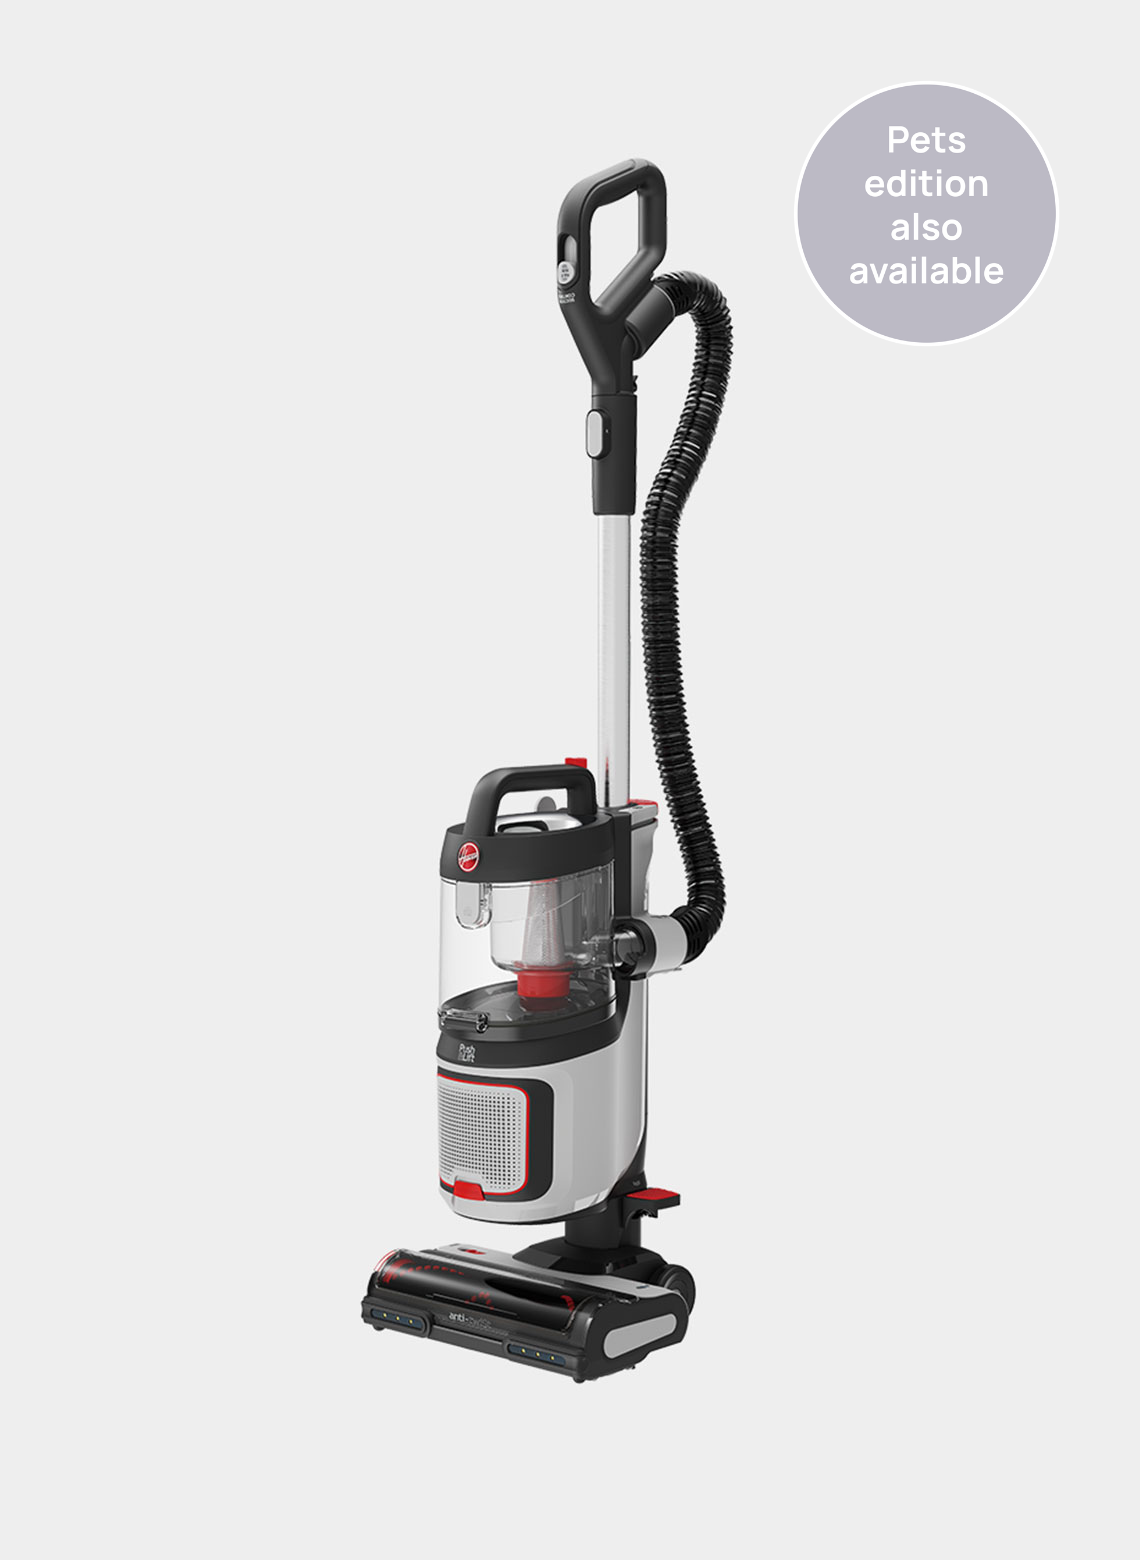 Who Was the Inventor of Hoover Vacuum Cleaners?